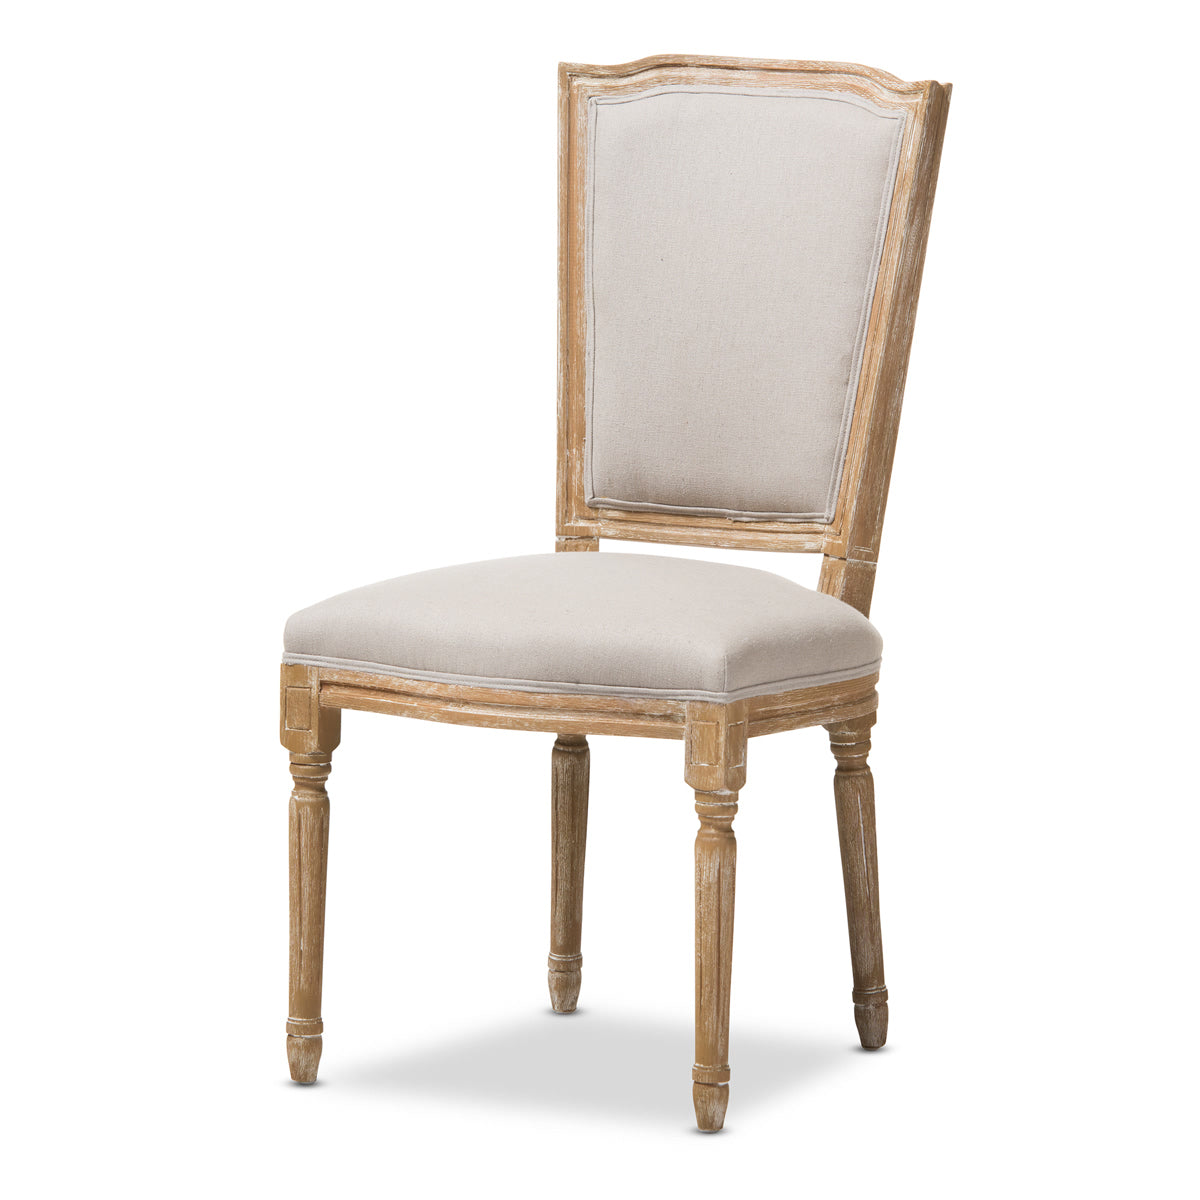 Baxton Studio Cadencia French Vintage Cottage Weathered Oak Finish Wood and Beige Fabric Upholstered Dining Side Chair Baxton Studio-dining chair-Minimal And Modern - 2